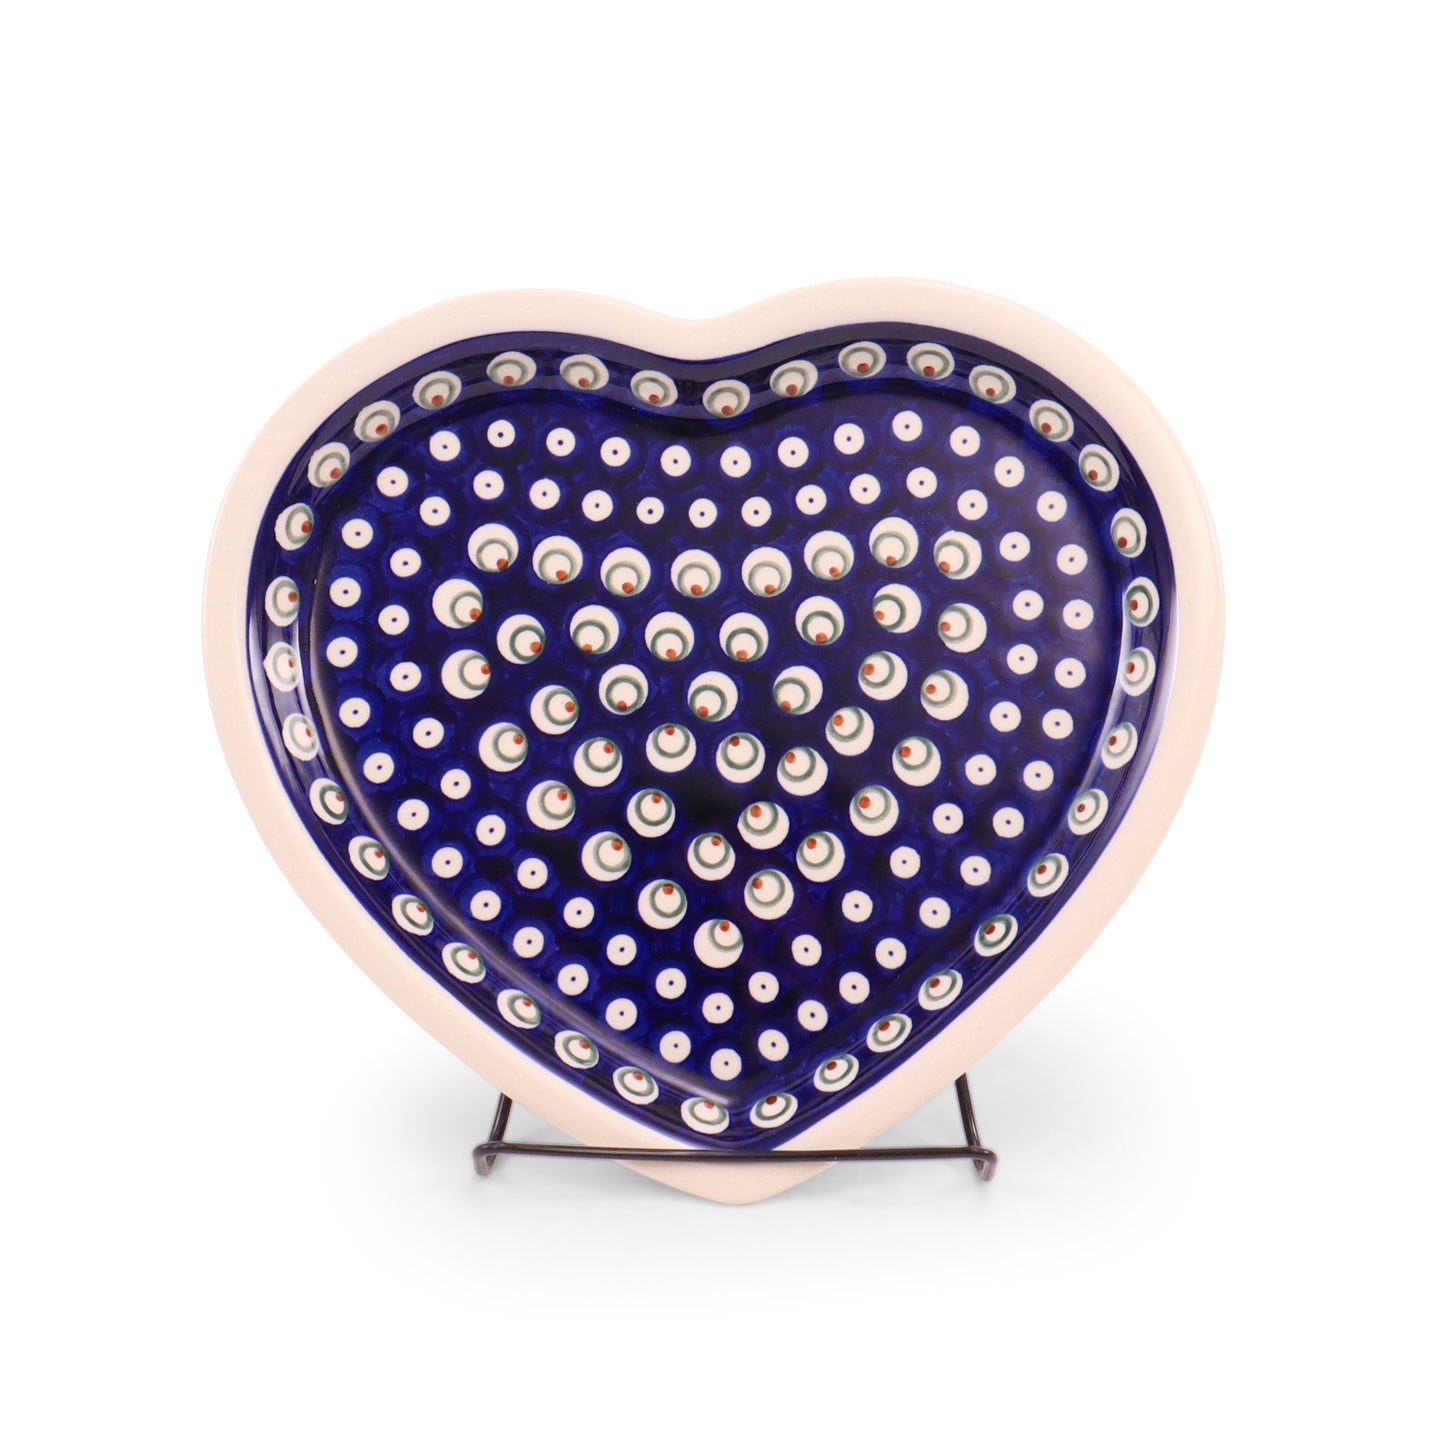 11"x10" Heart Plate. Pattern: Private Eyes